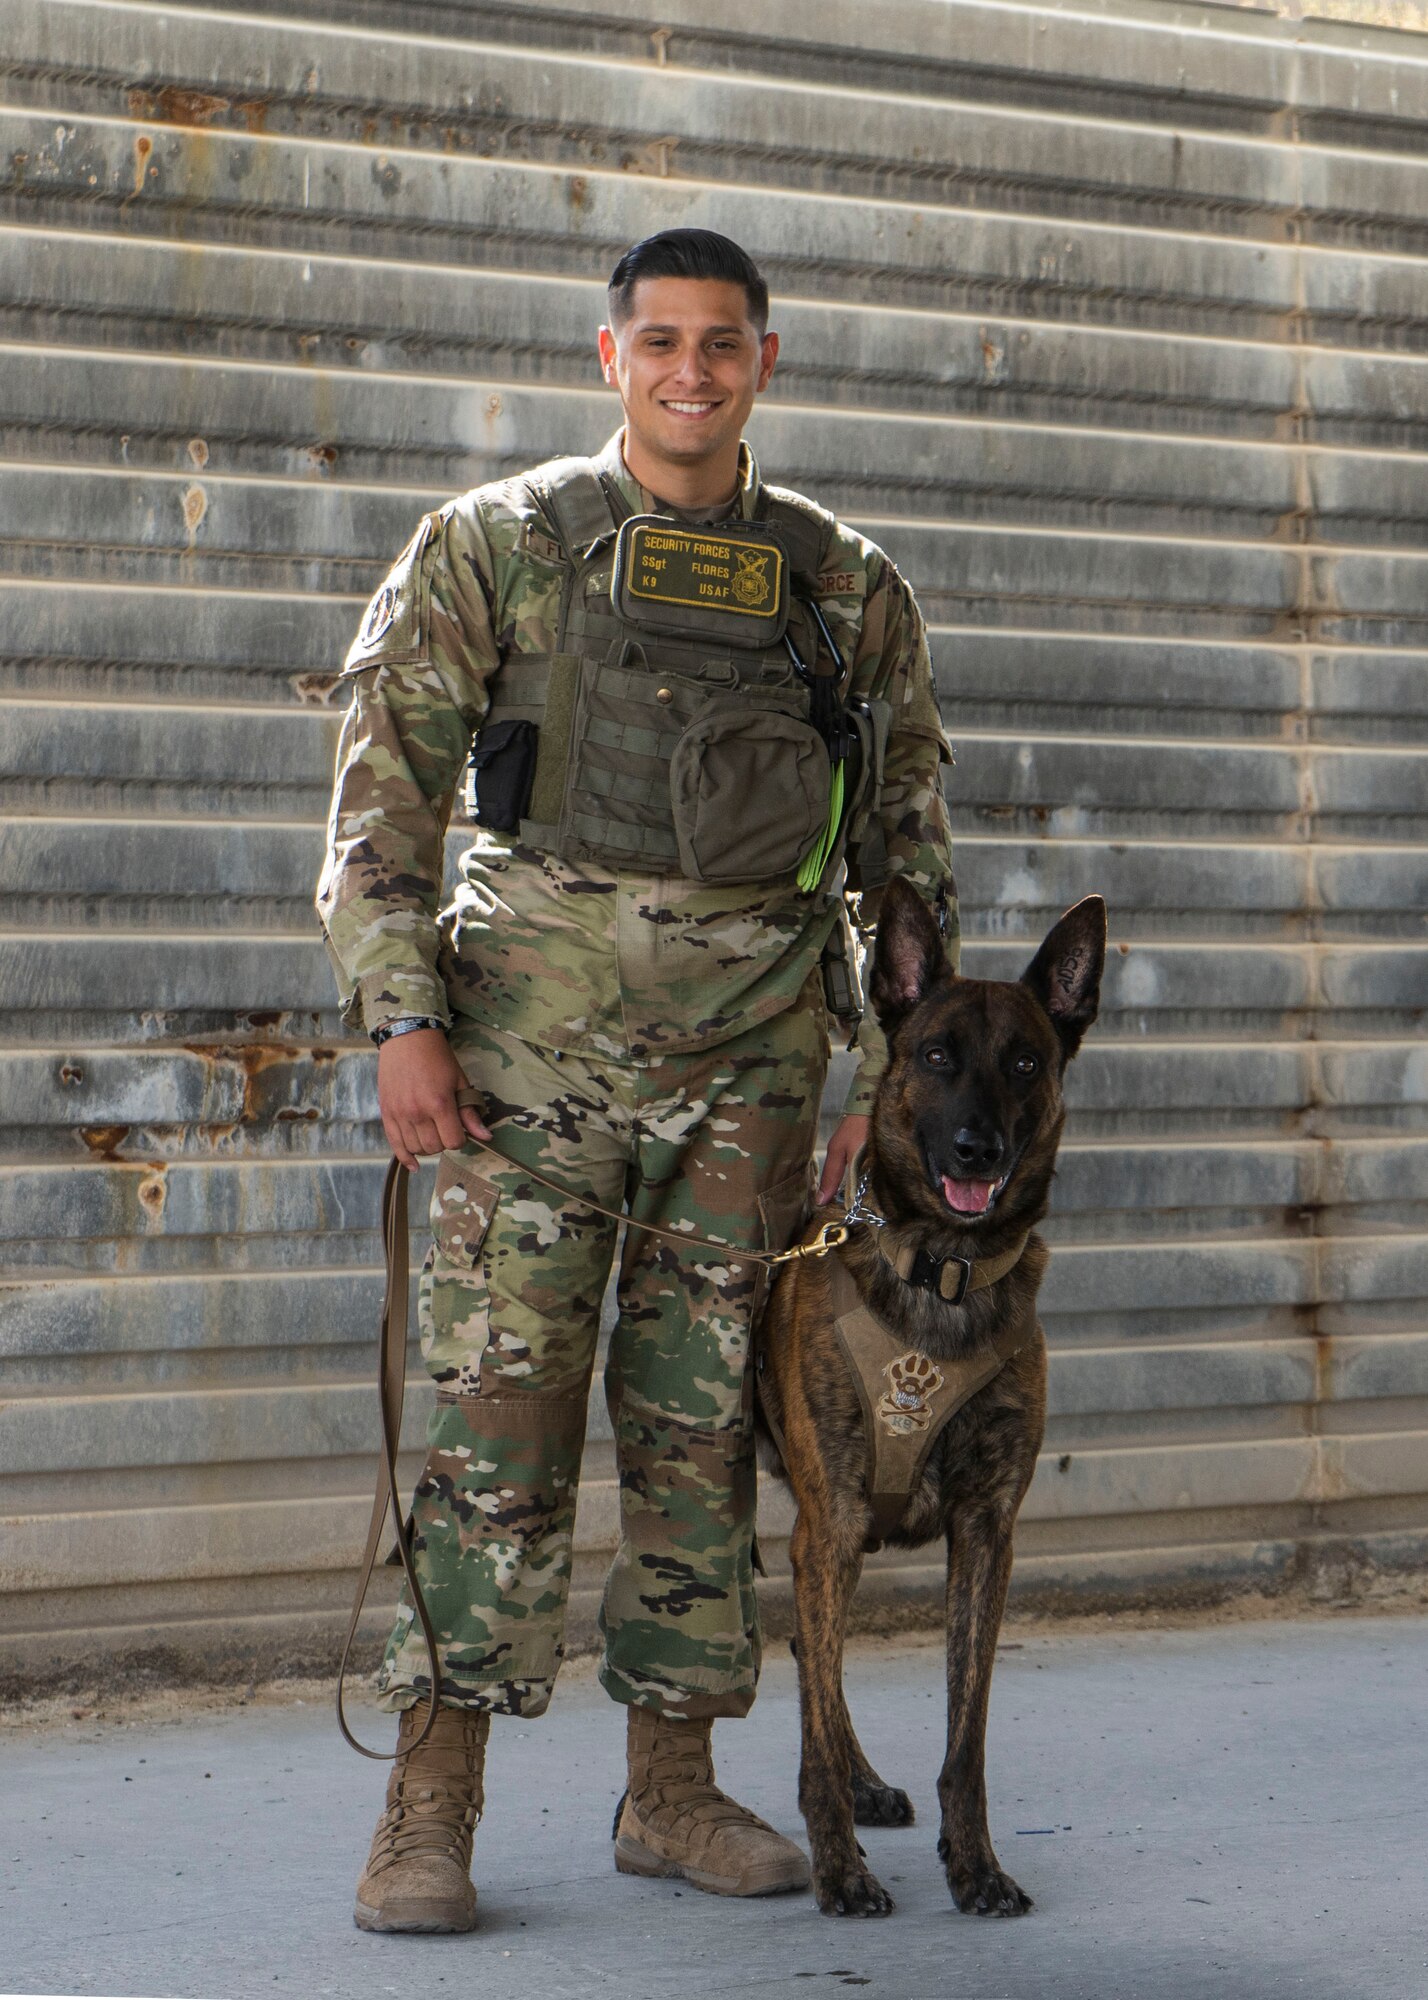 U.S. Air Force Staff Sgt. Angel Flores, 379th Expeditionary Security Forces Squadron military working dog handler, and AAslan, 379th ESFS MWD, pose together at Al Udeid Air Base, Qatar, July 2, 2020. MWDs train at Joint Base San Antonio-Lackland before being transferred to handlers. (U.S. Air Force photo by Senior Airman Olivia Grooms)